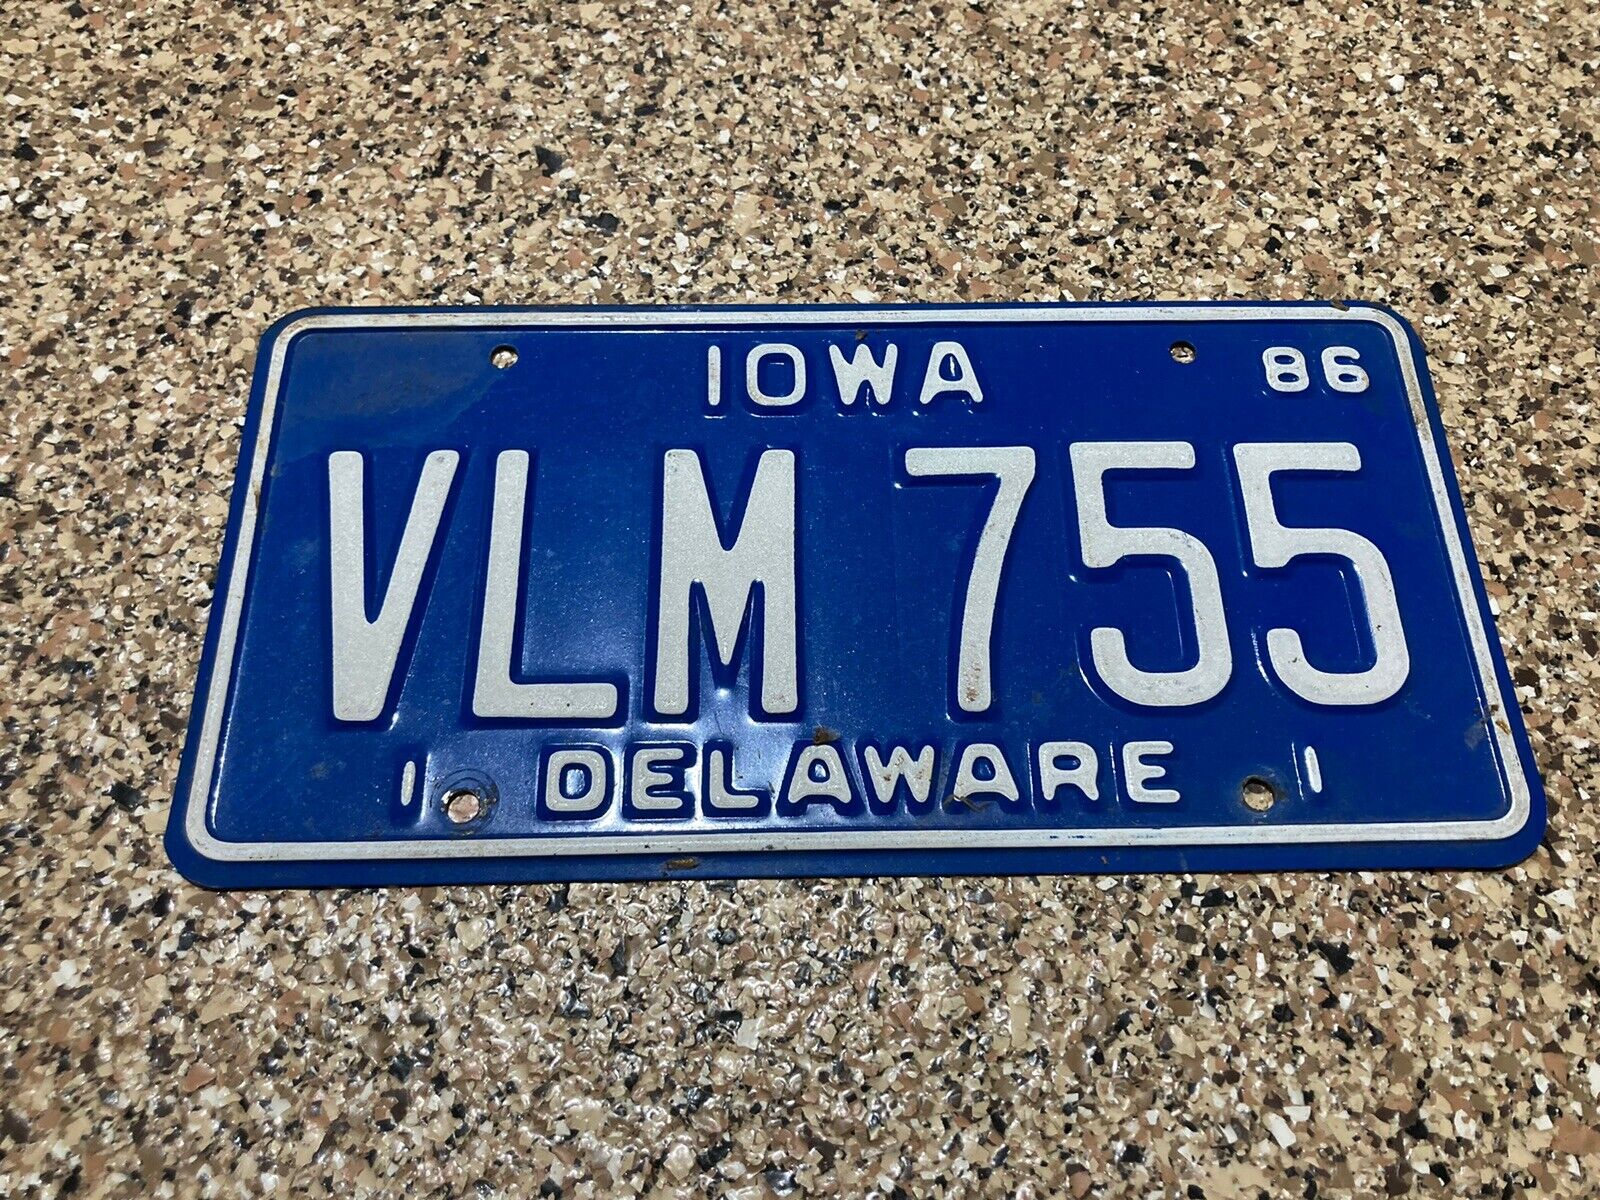 VTG 1986 Iowa IA State Delaware County Expired Tag License Plate VLM 755 NICE